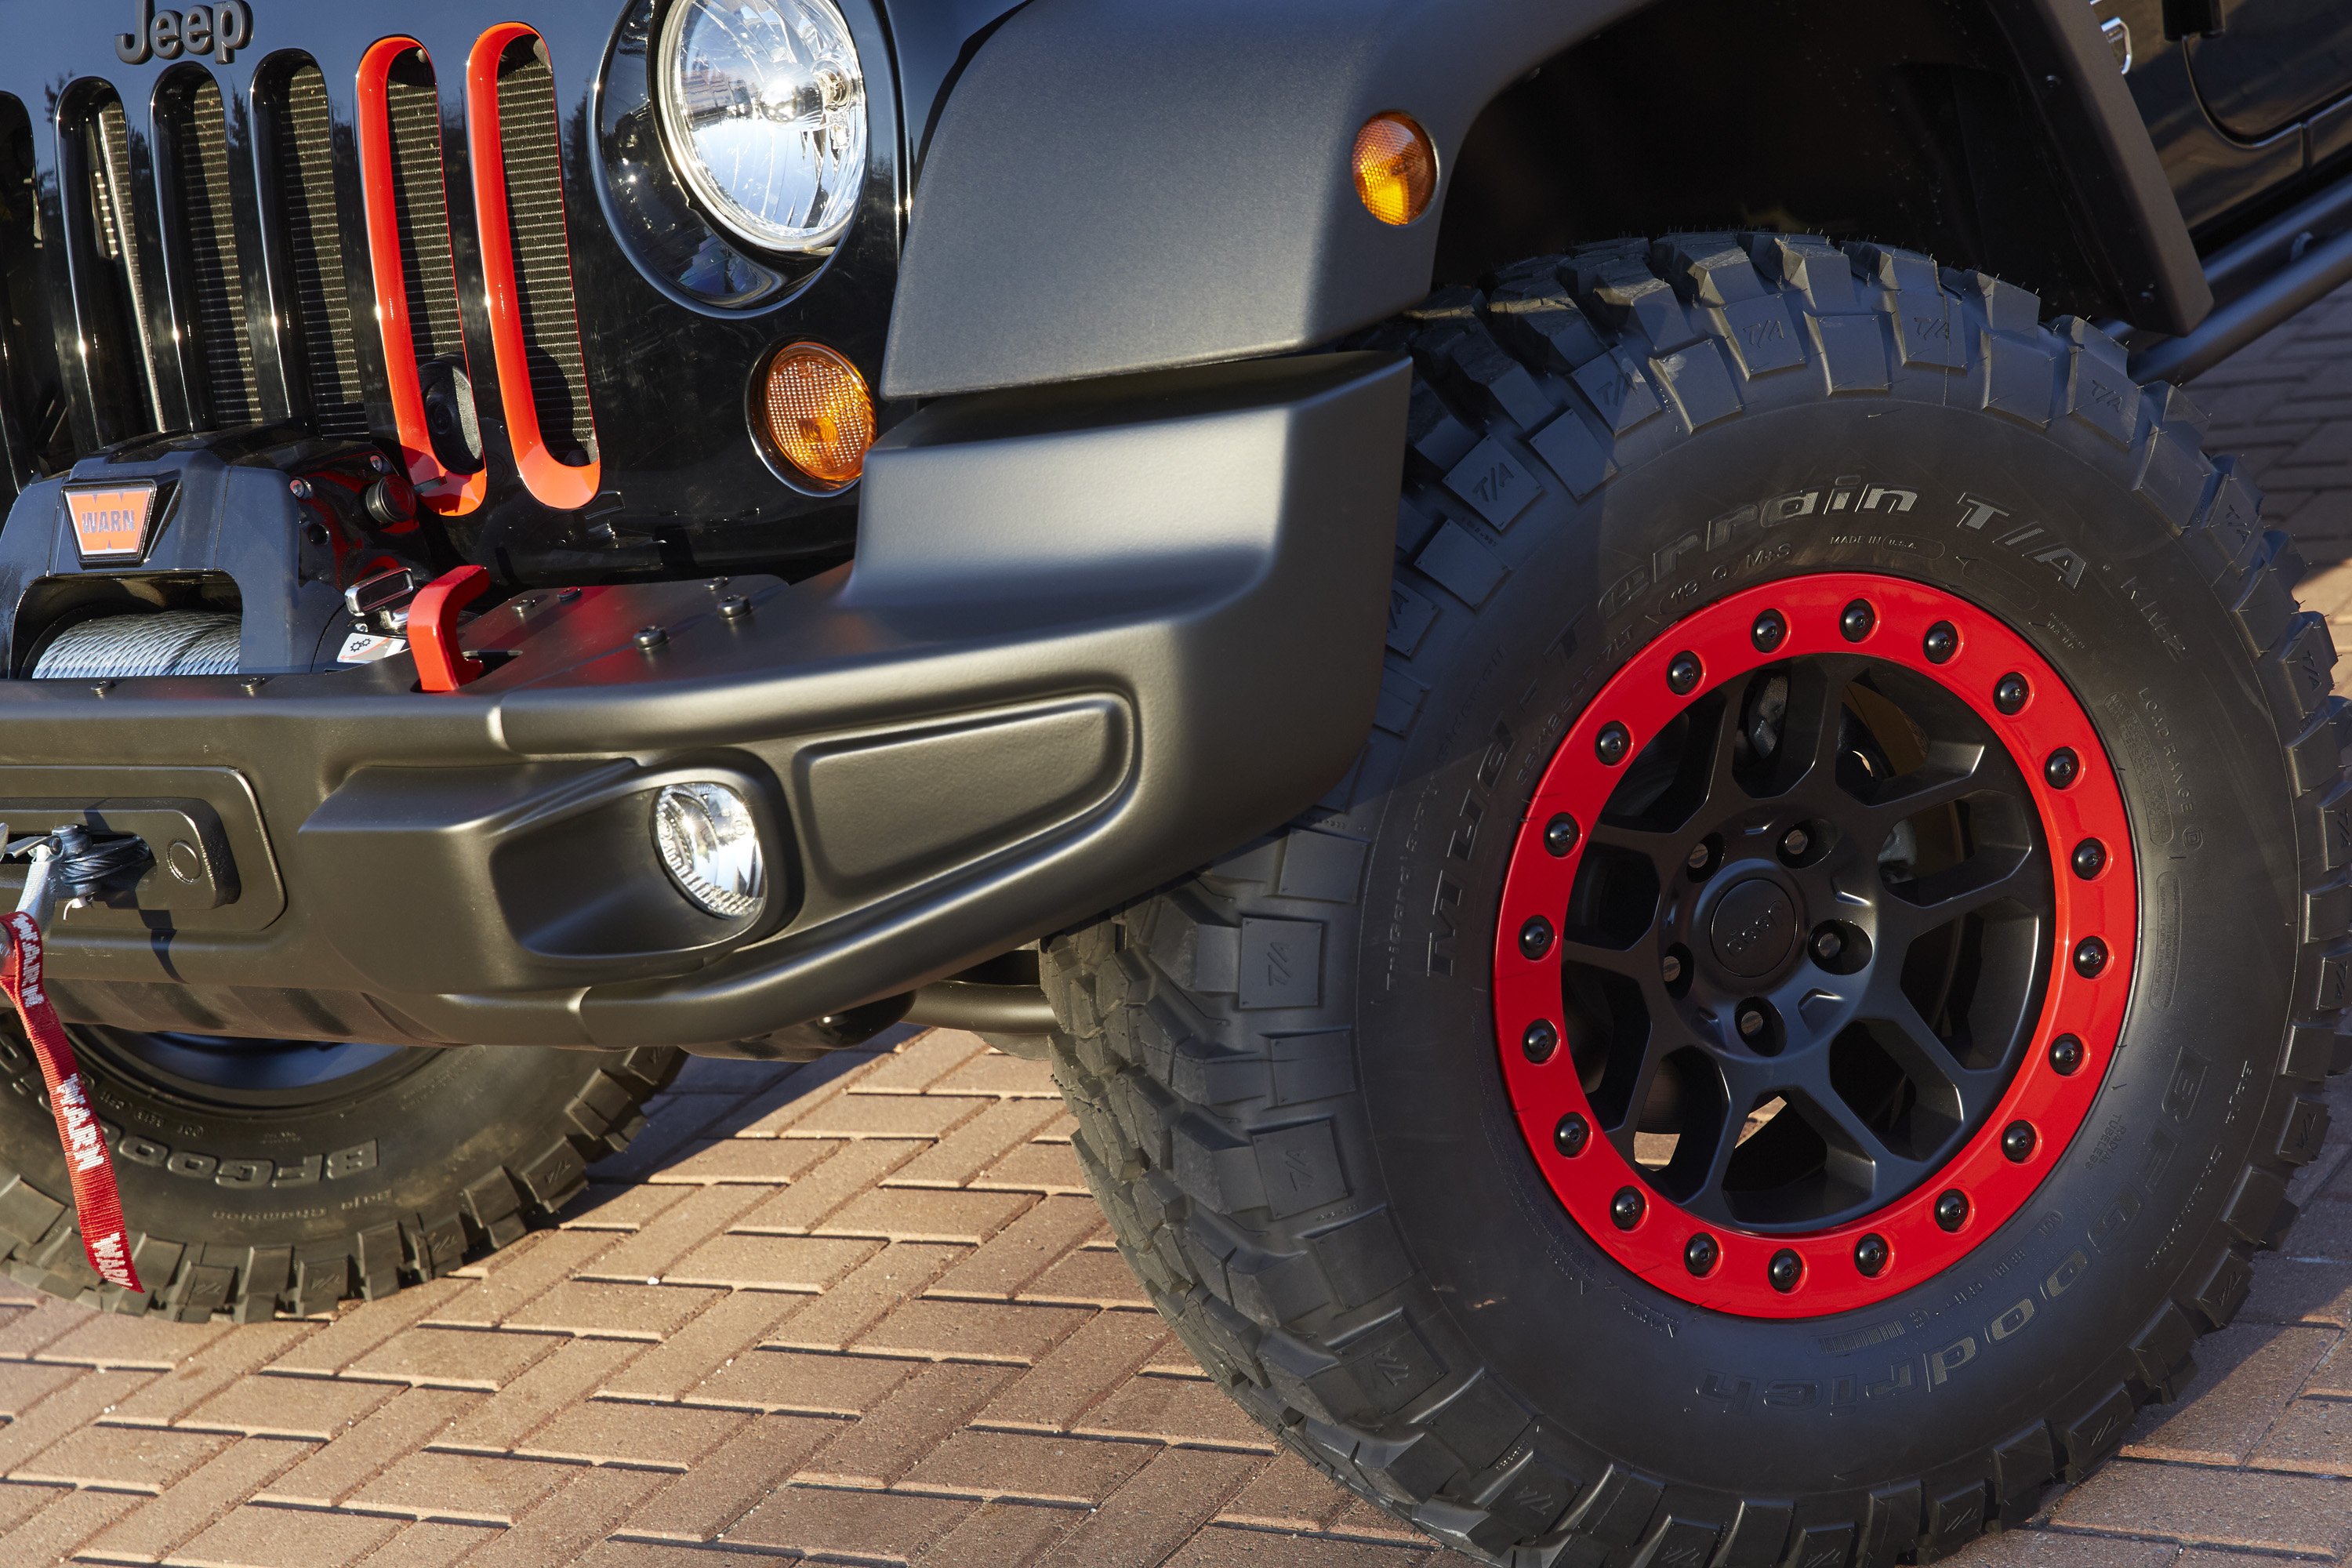 Jeep Wrangler Level Red is one of the six concept vehicles devel